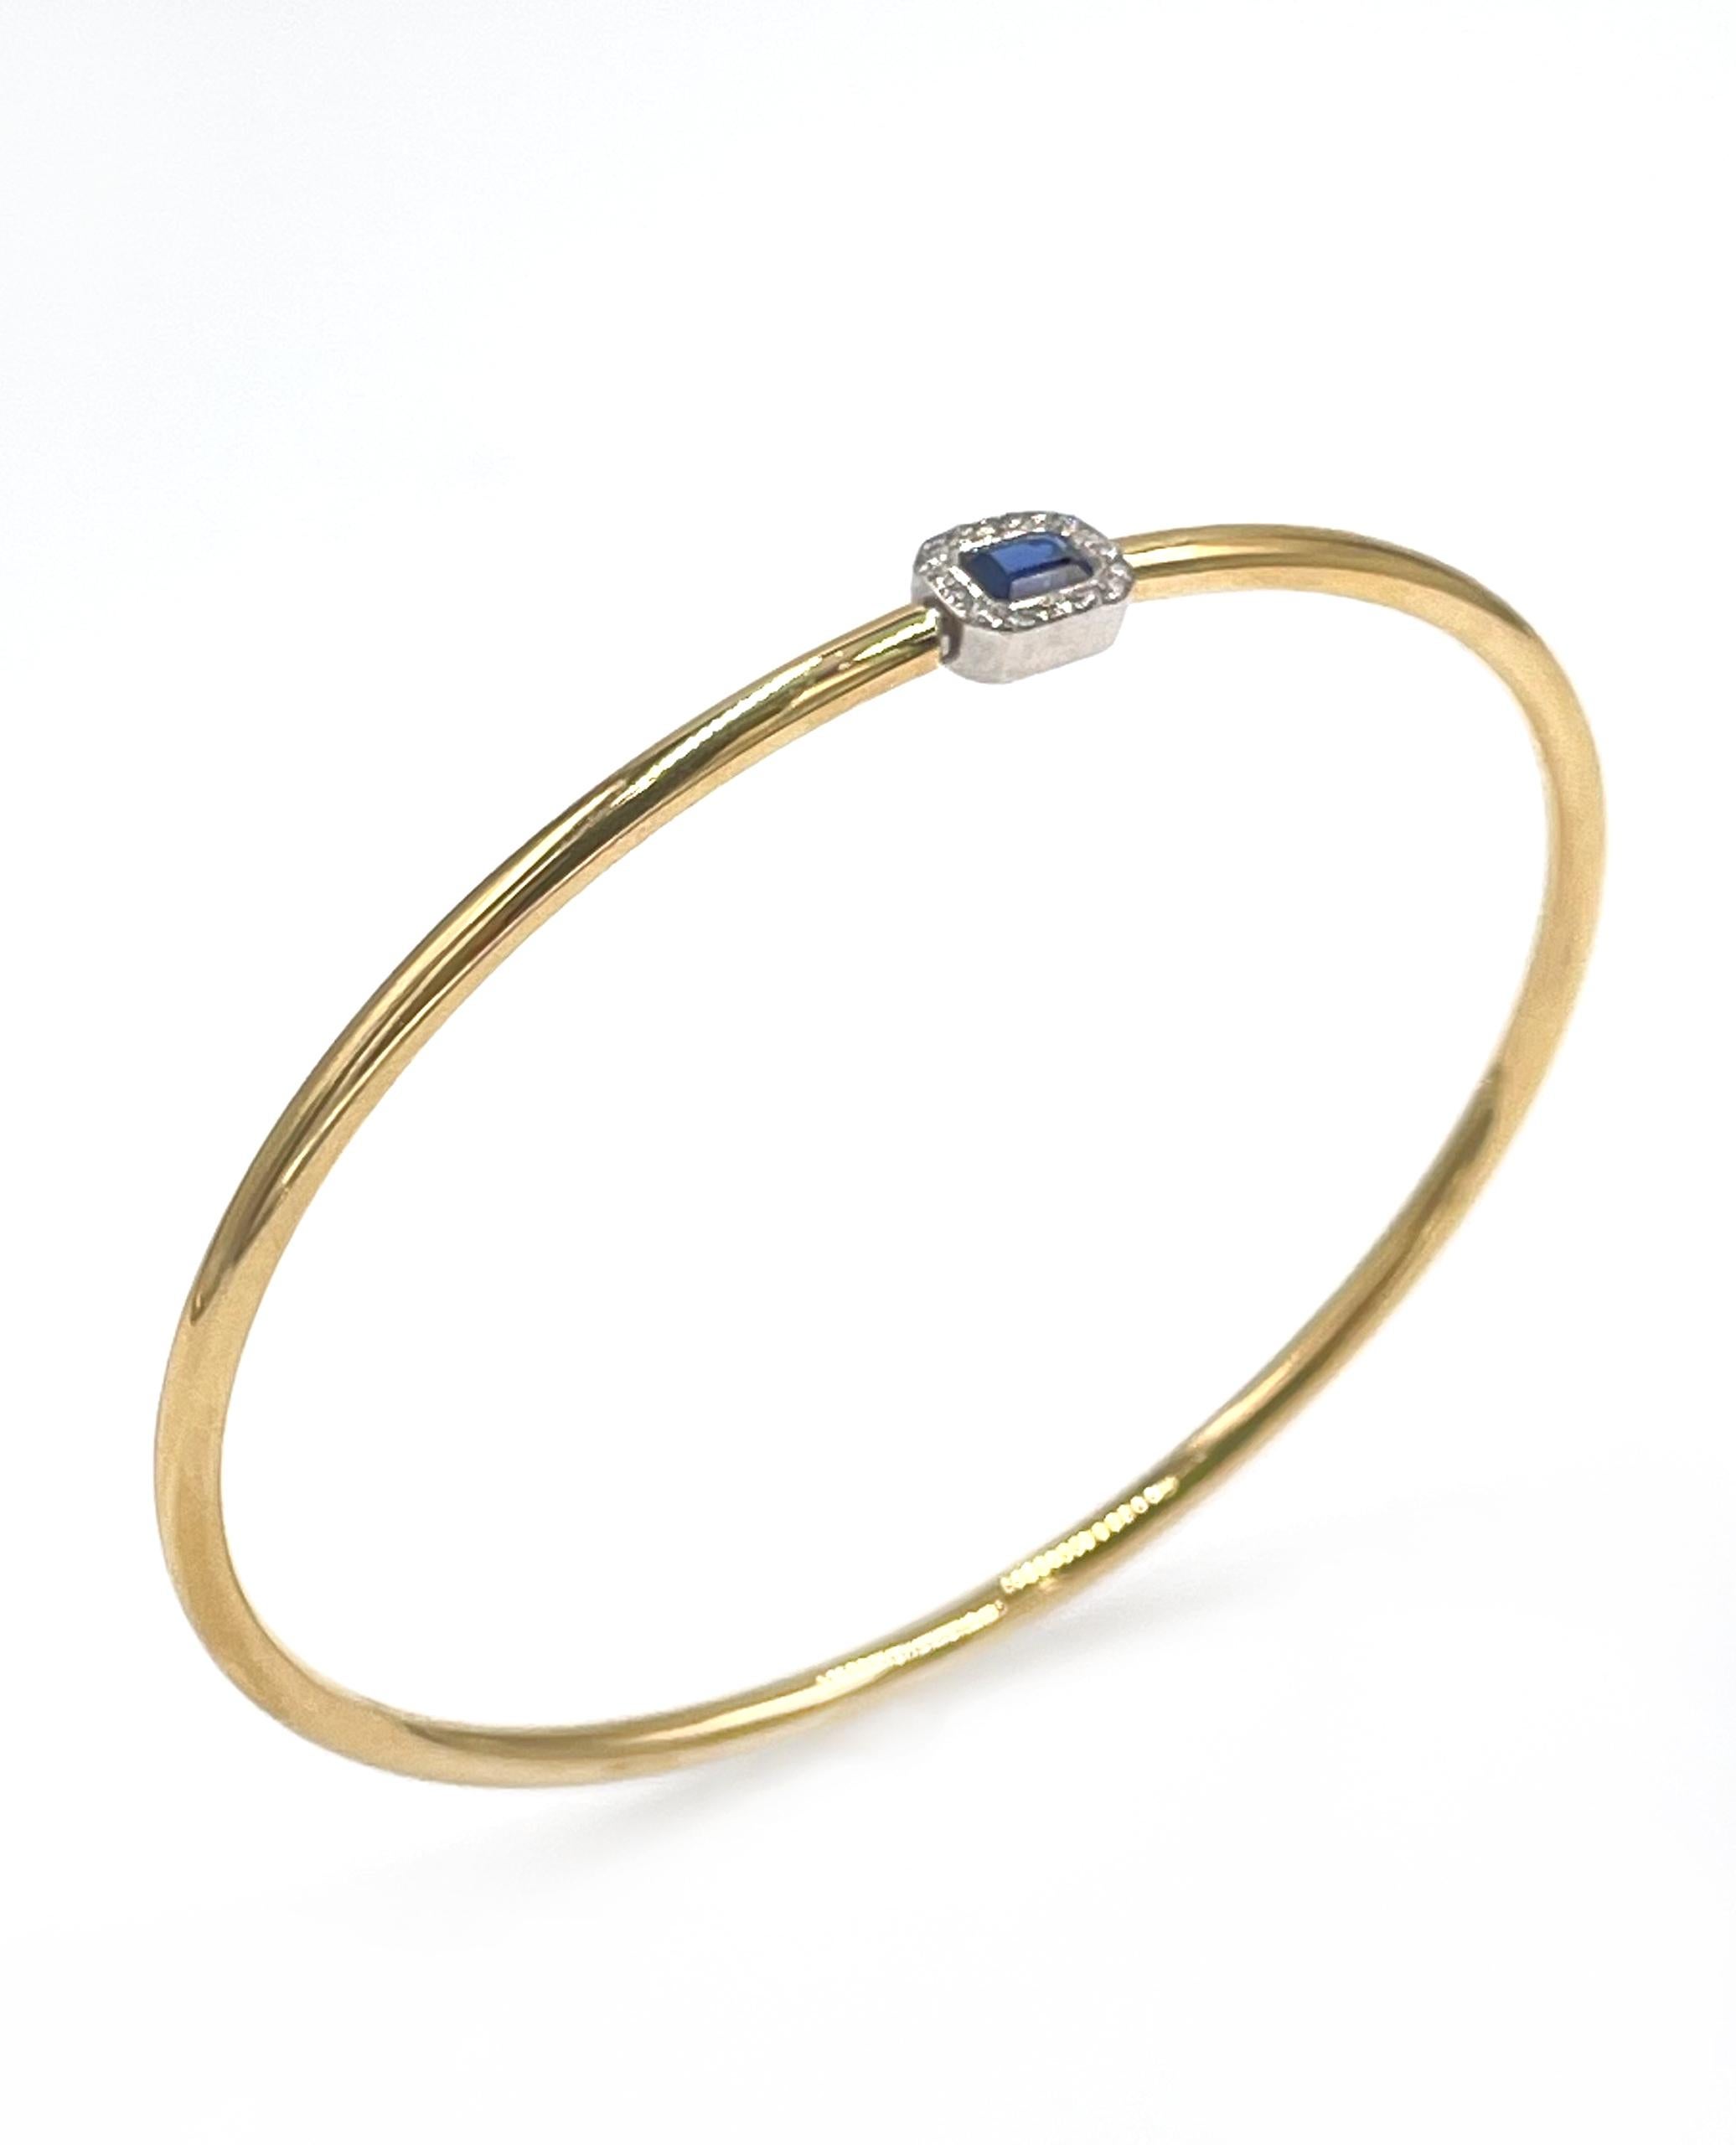 Simon G. 18K yellow and white gold bangle bracelet with 18 round brilliant-cut diamonds 0.05 carat and 1 emerald cut blue sapphire weighing 0.35 carat.

- Style No. LB2494
- Diamonds are G/H color, SI clarity